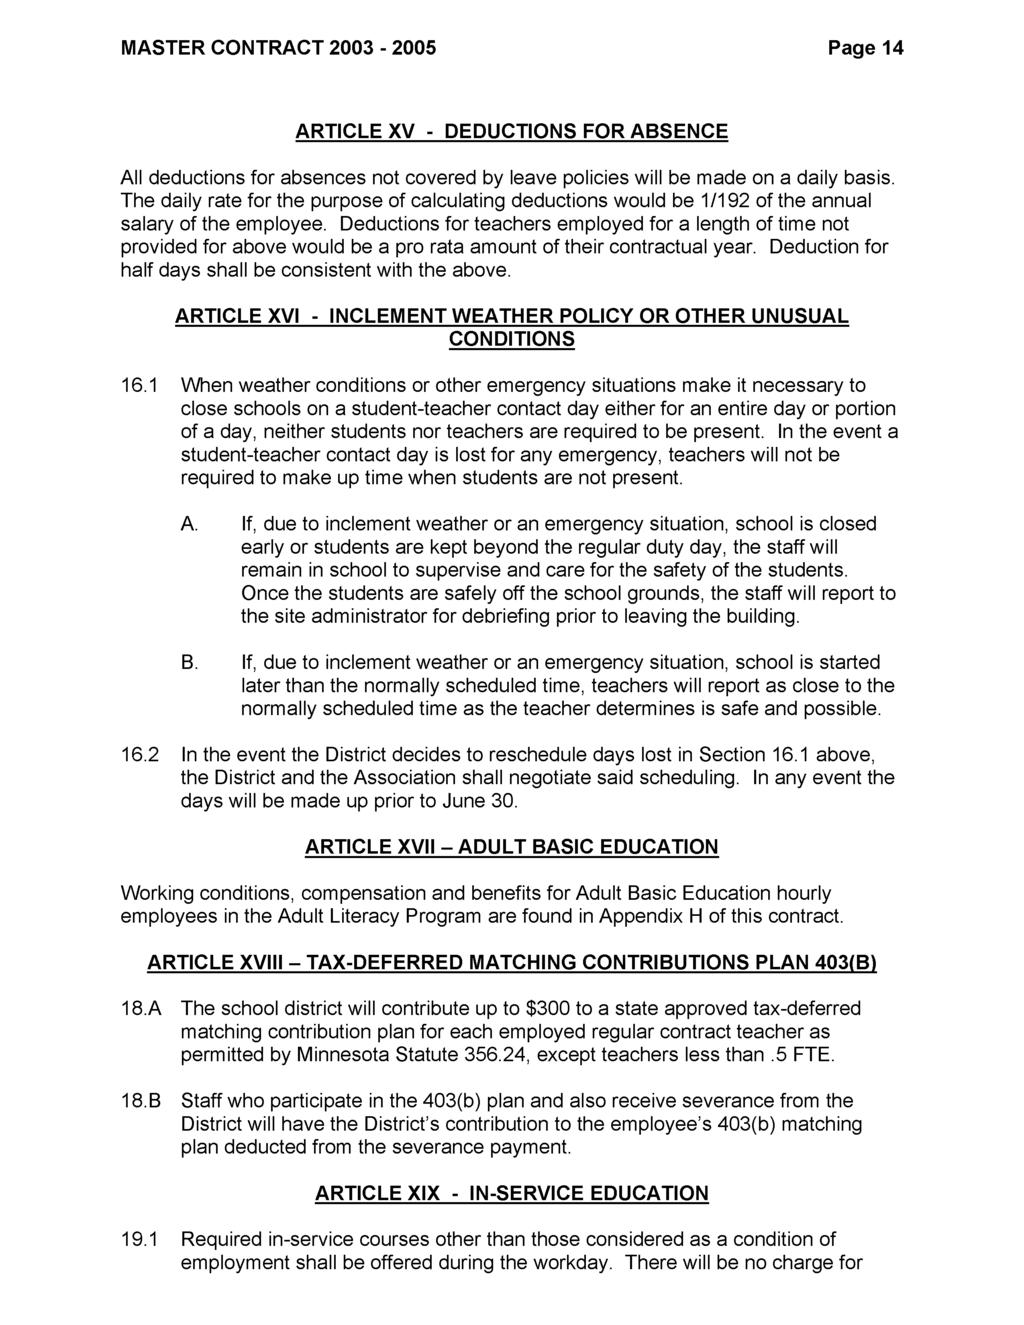 MASTER CONTRACT 2003-2005 Page 14 ARTICLE XV - DEDUCTIONS FOR ABSENCE All deductions for absences not covered by leave policies will be made on a daily basis.